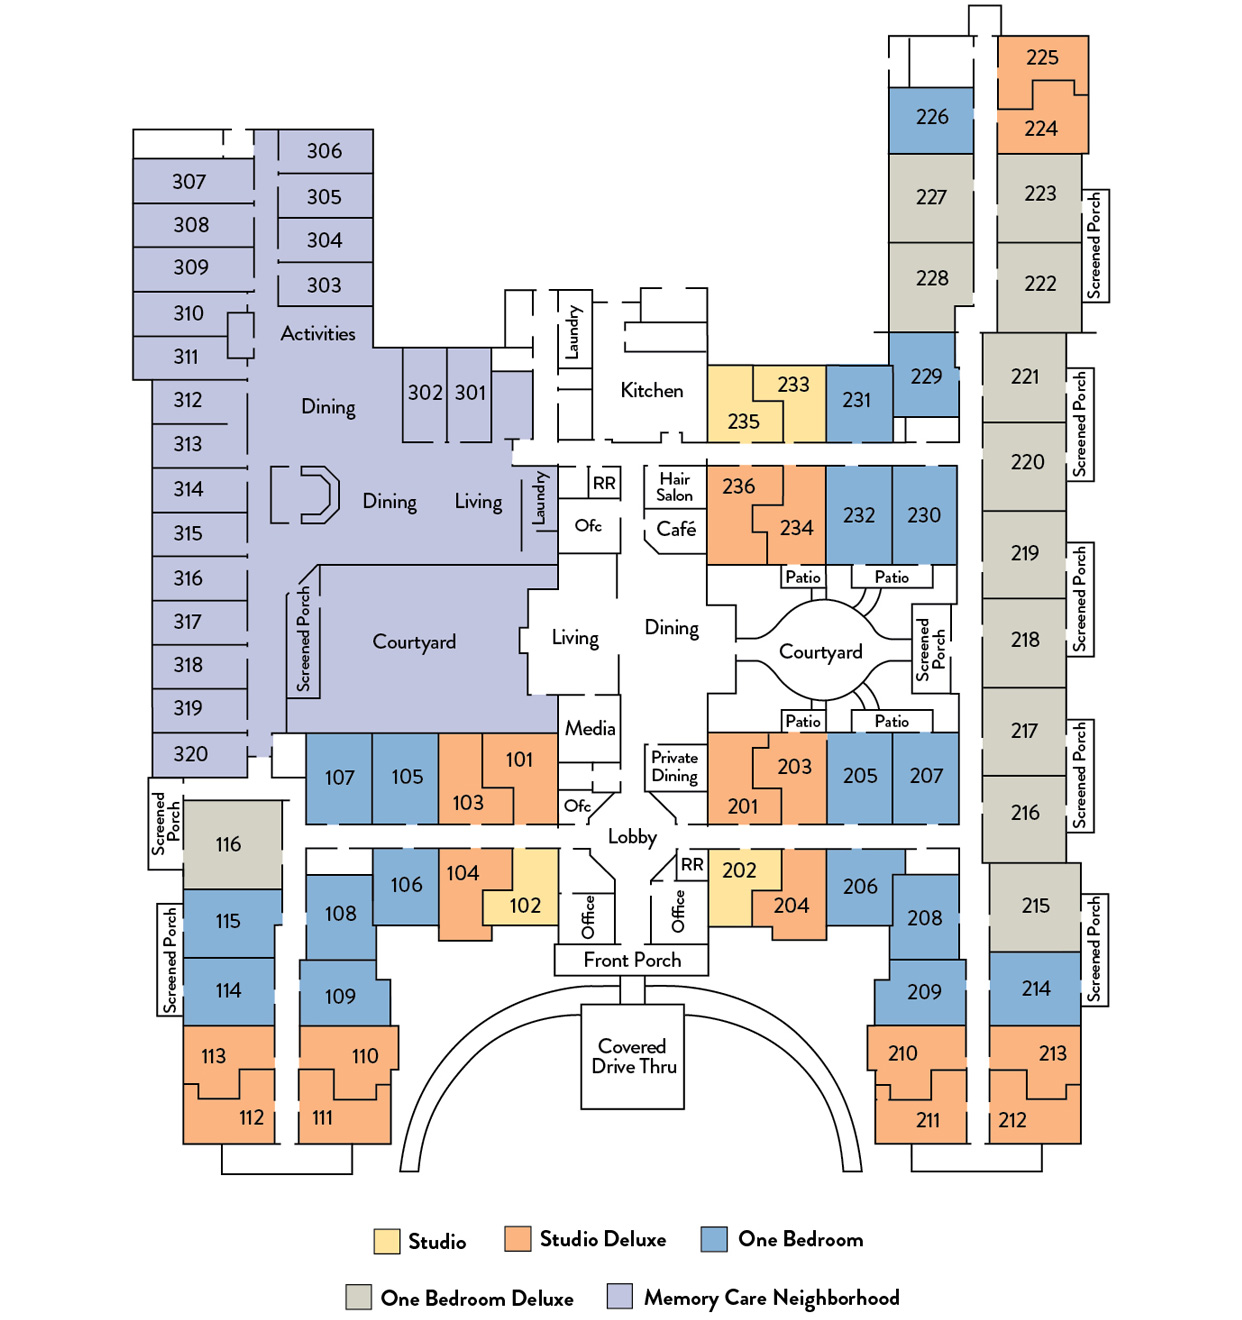 Assisted Living Community Floor Plan Overview